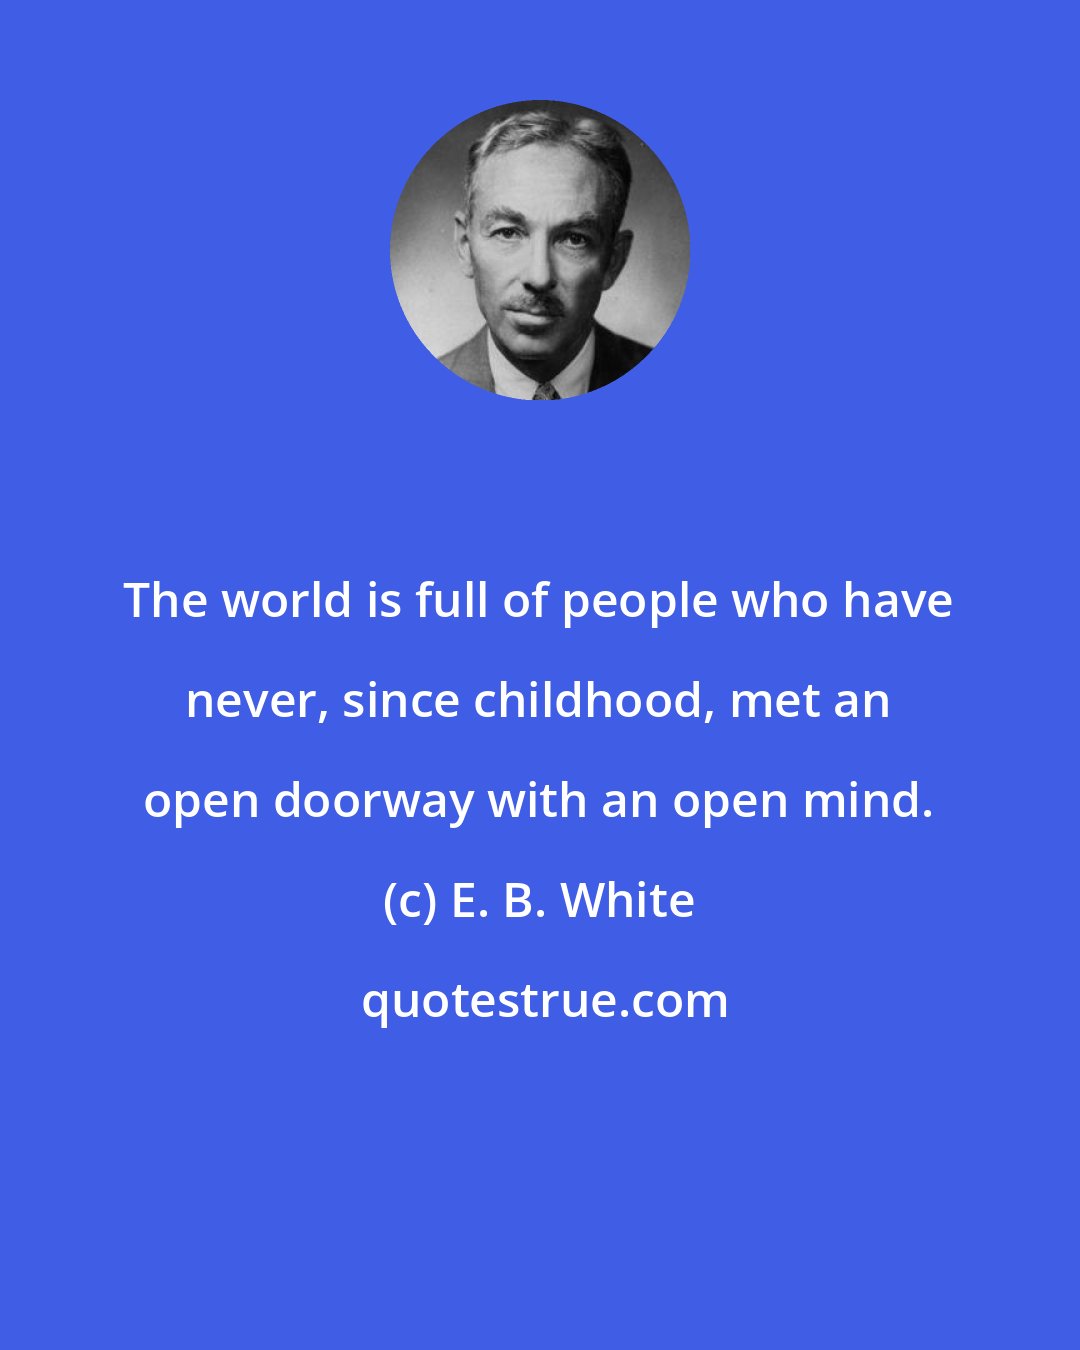 E. B. White: The world is full of people who have never, since childhood, met an open doorway with an open mind.